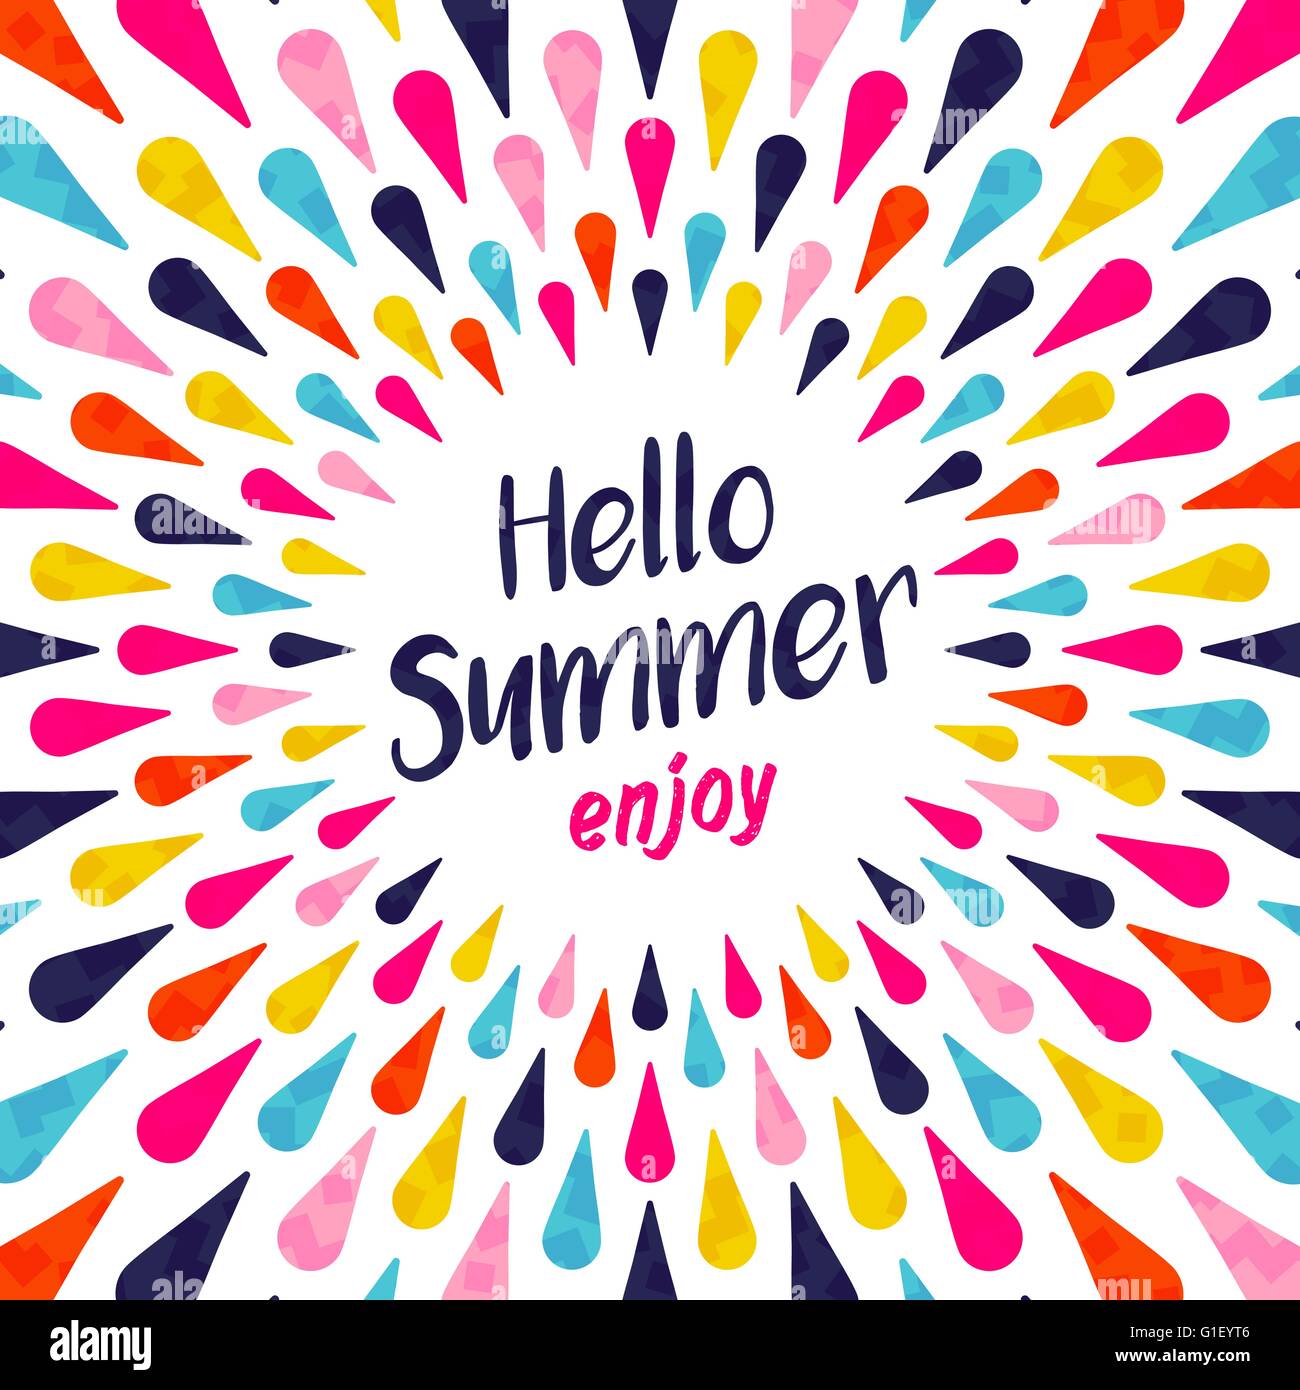 Hello summer lettering background illustration design, enjoy vacation concept with colorful decoration. Summertime party Stock Vector